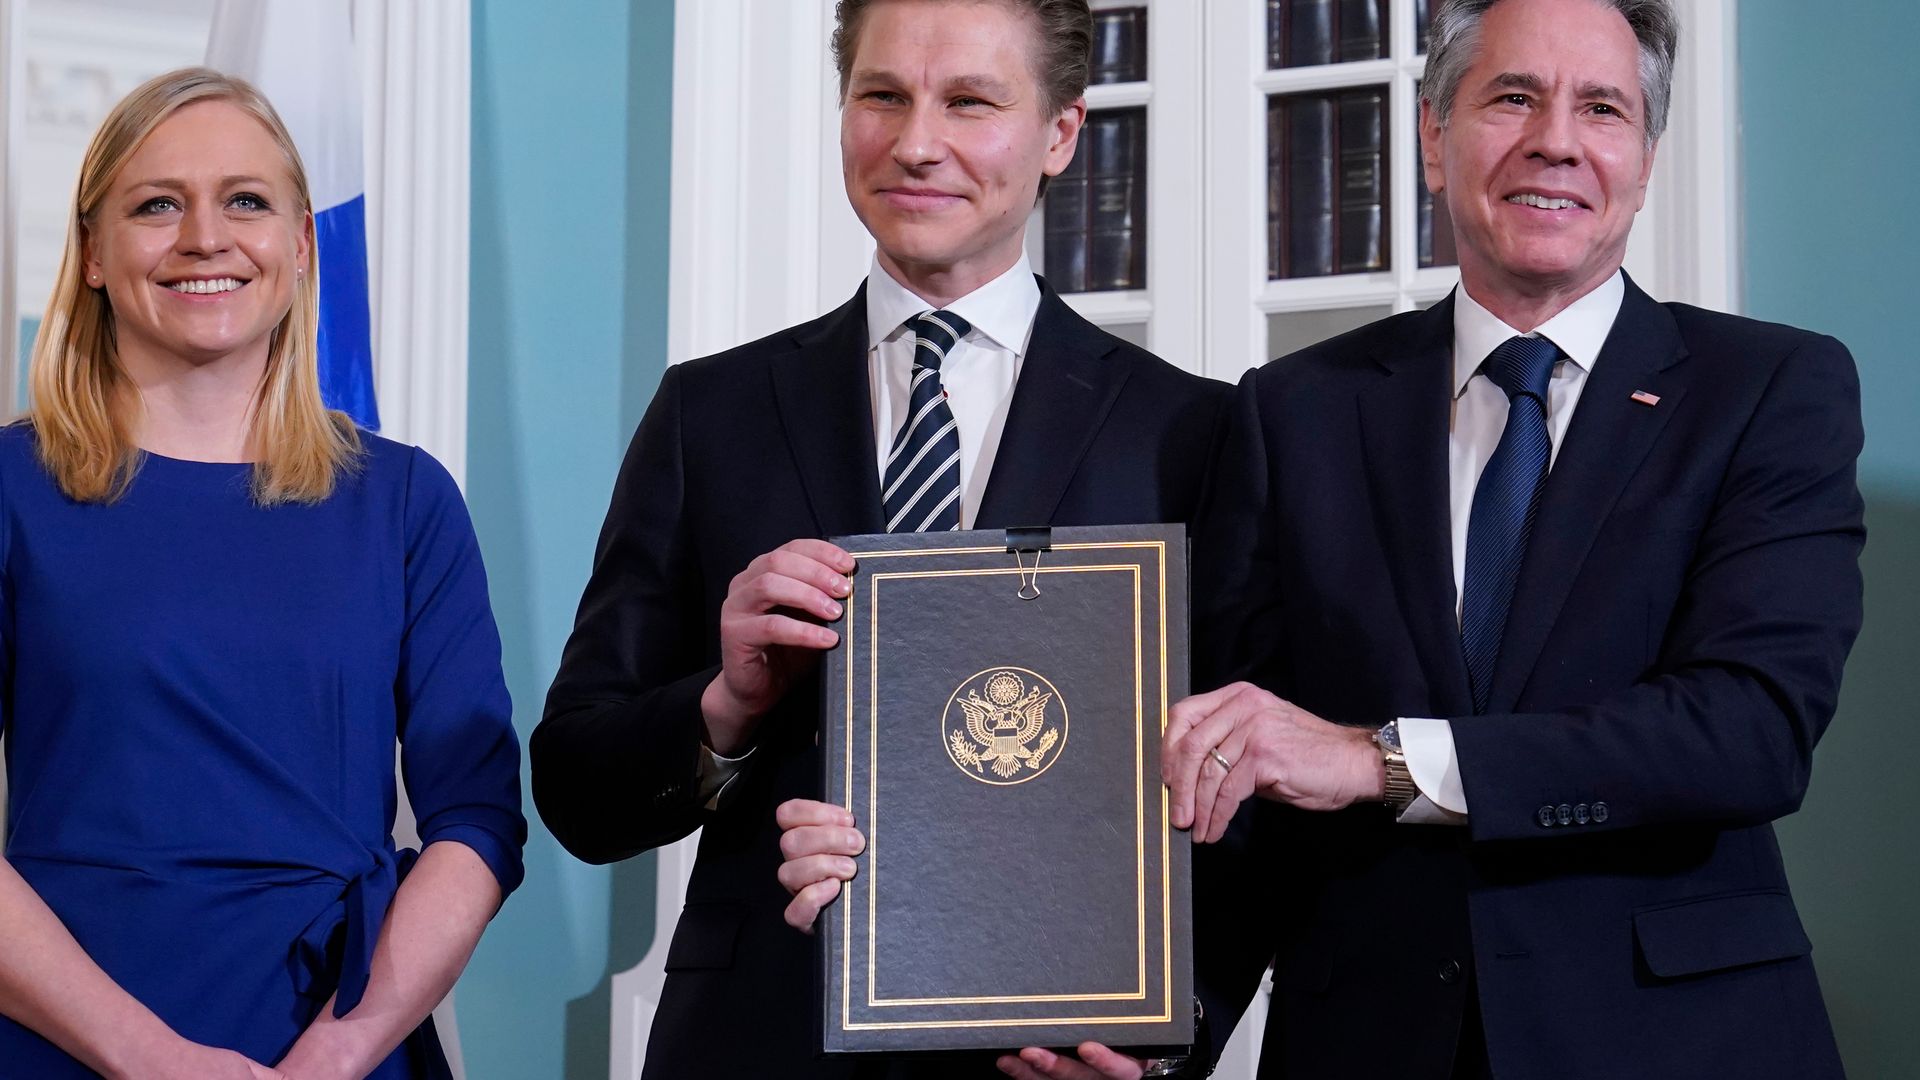 The U.S. and Finland solidified an agreement to bolster military cooperation, giving the U.S. wide access along the Finland-Russia border.